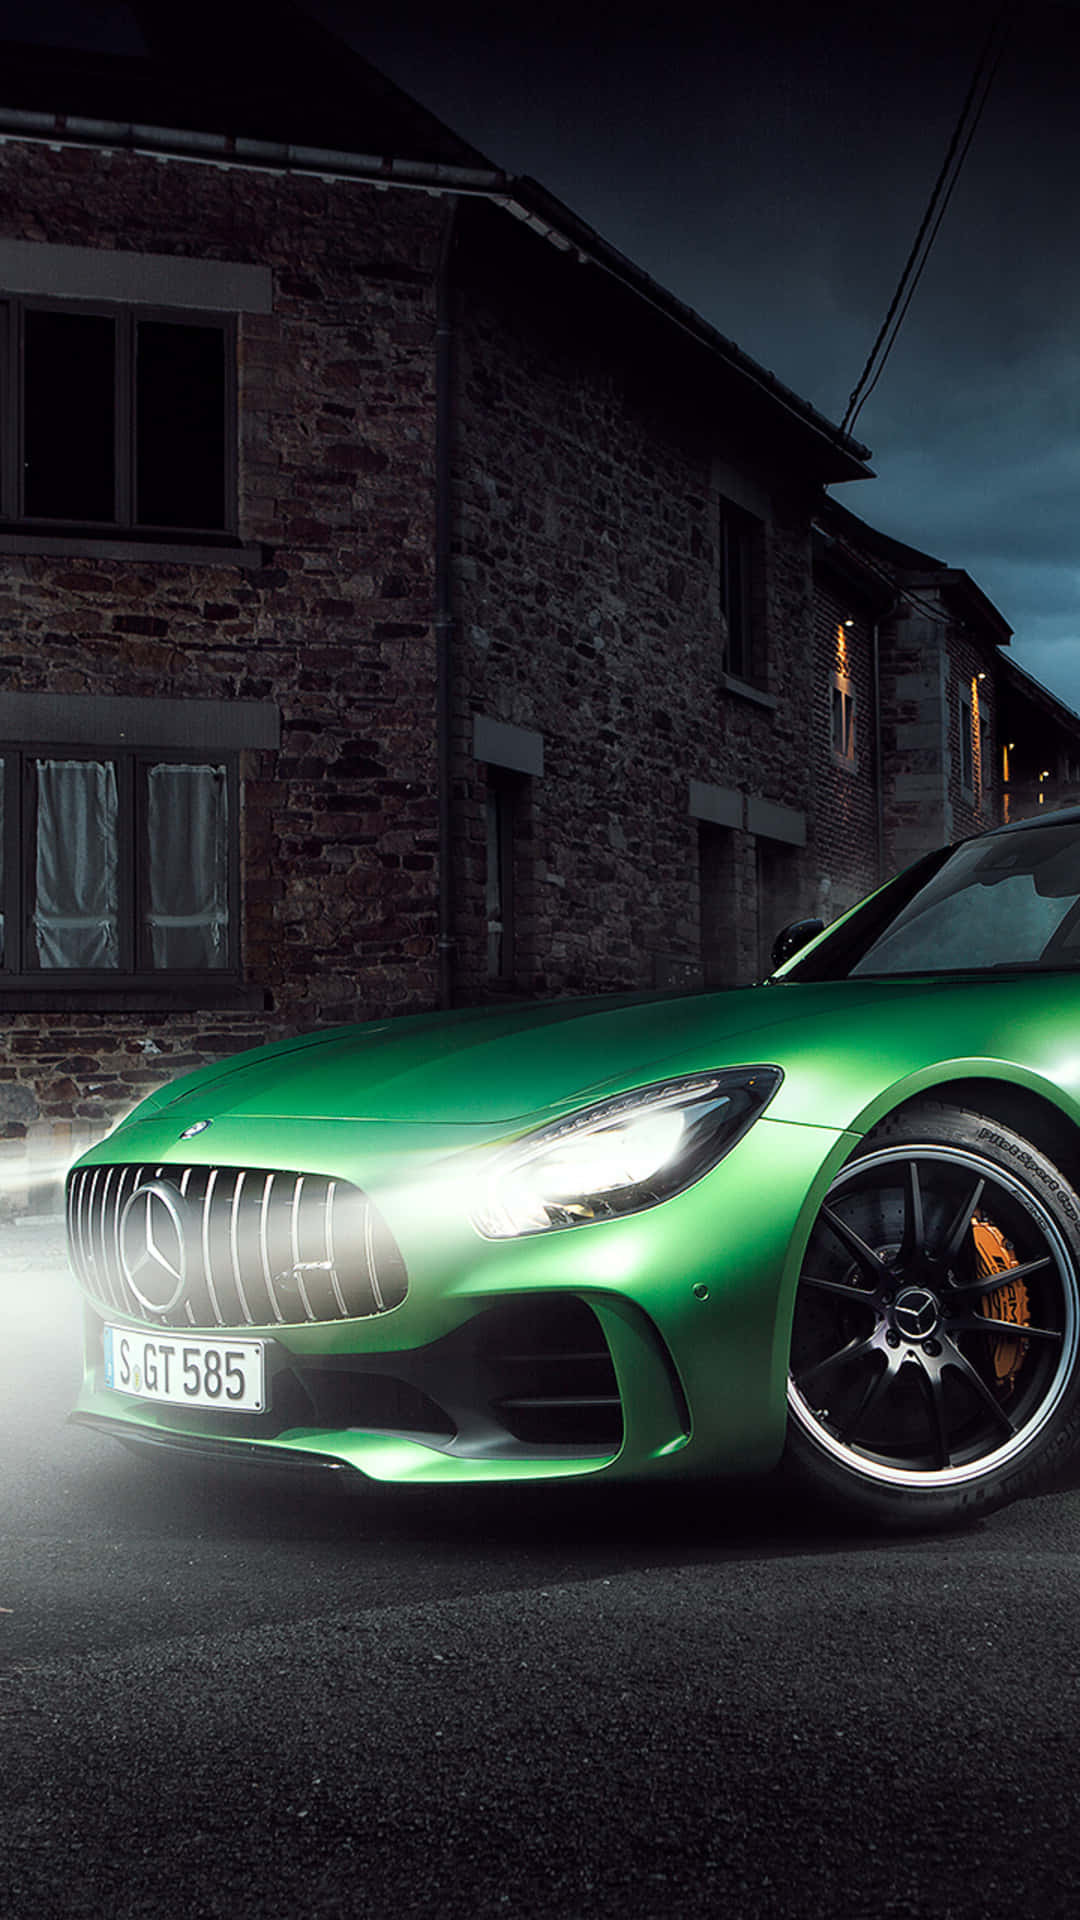 Green Mercedes Amg Gt R With Night Street Background